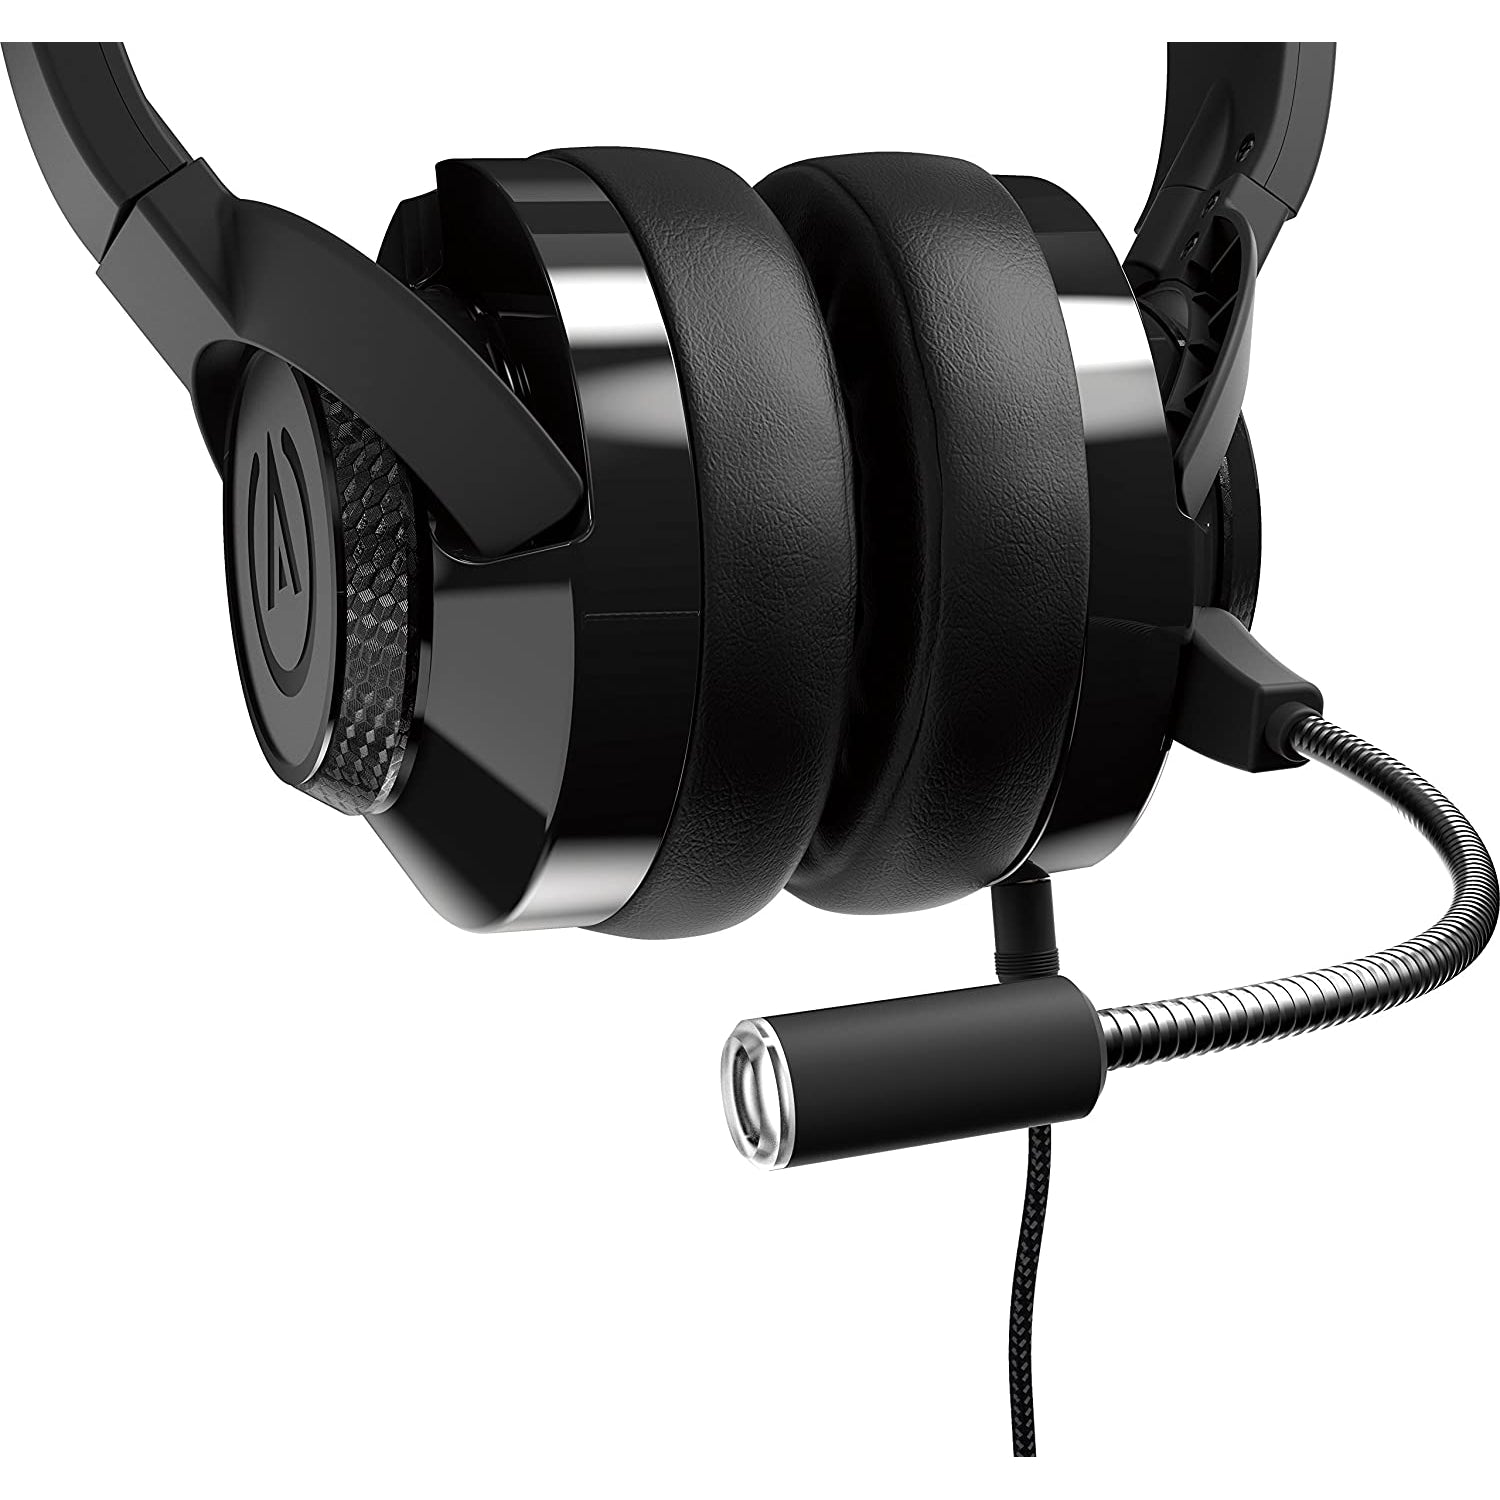 PowerA FUSION Wired Gaming Headset with Mic - Black - New